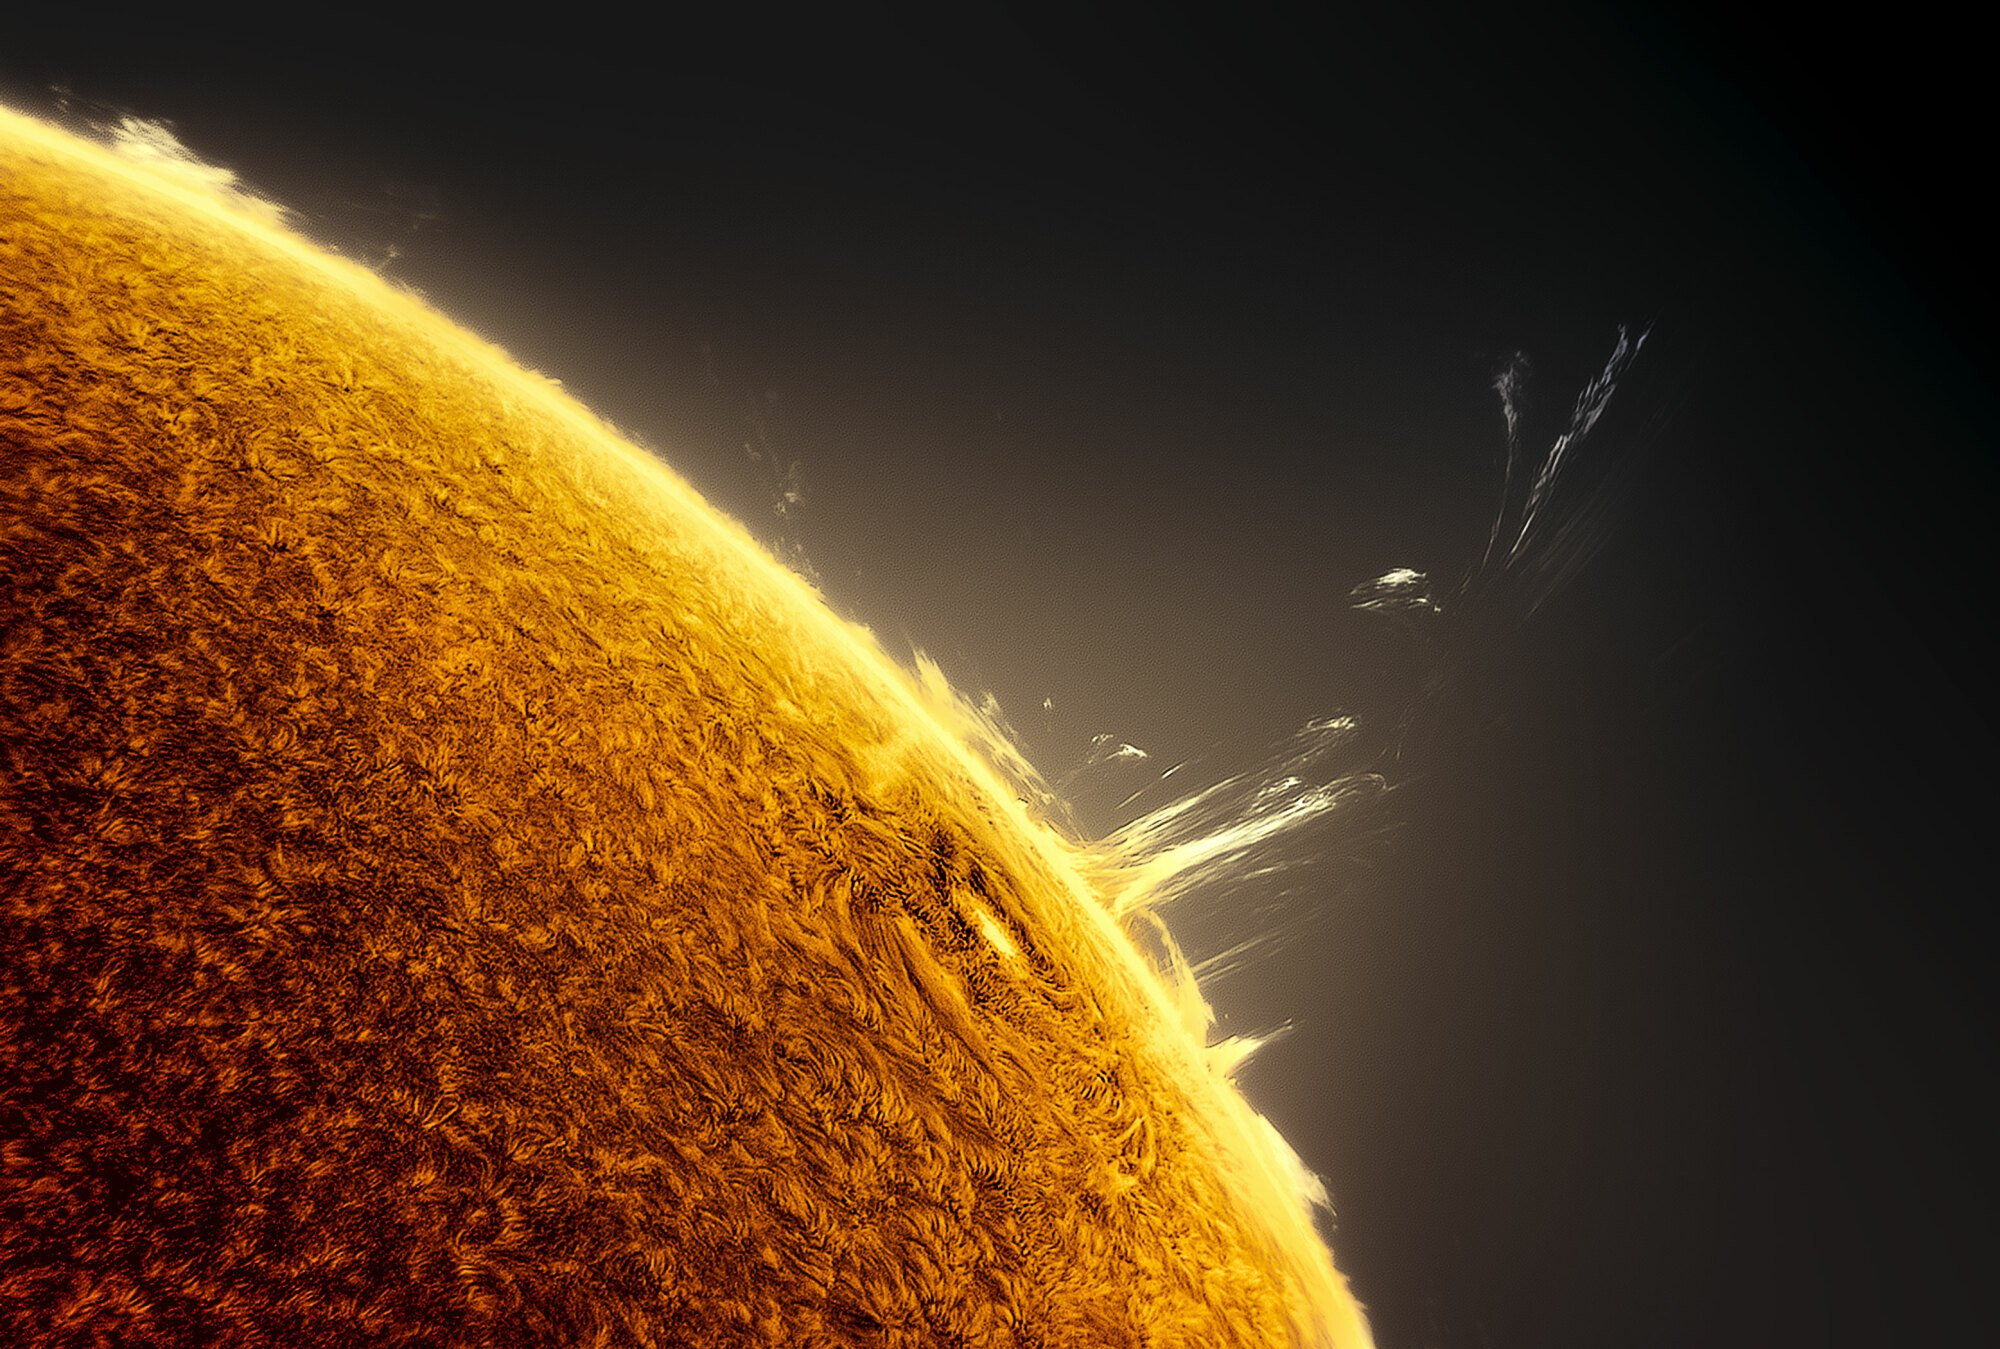 A close-up of the surface of the sun.